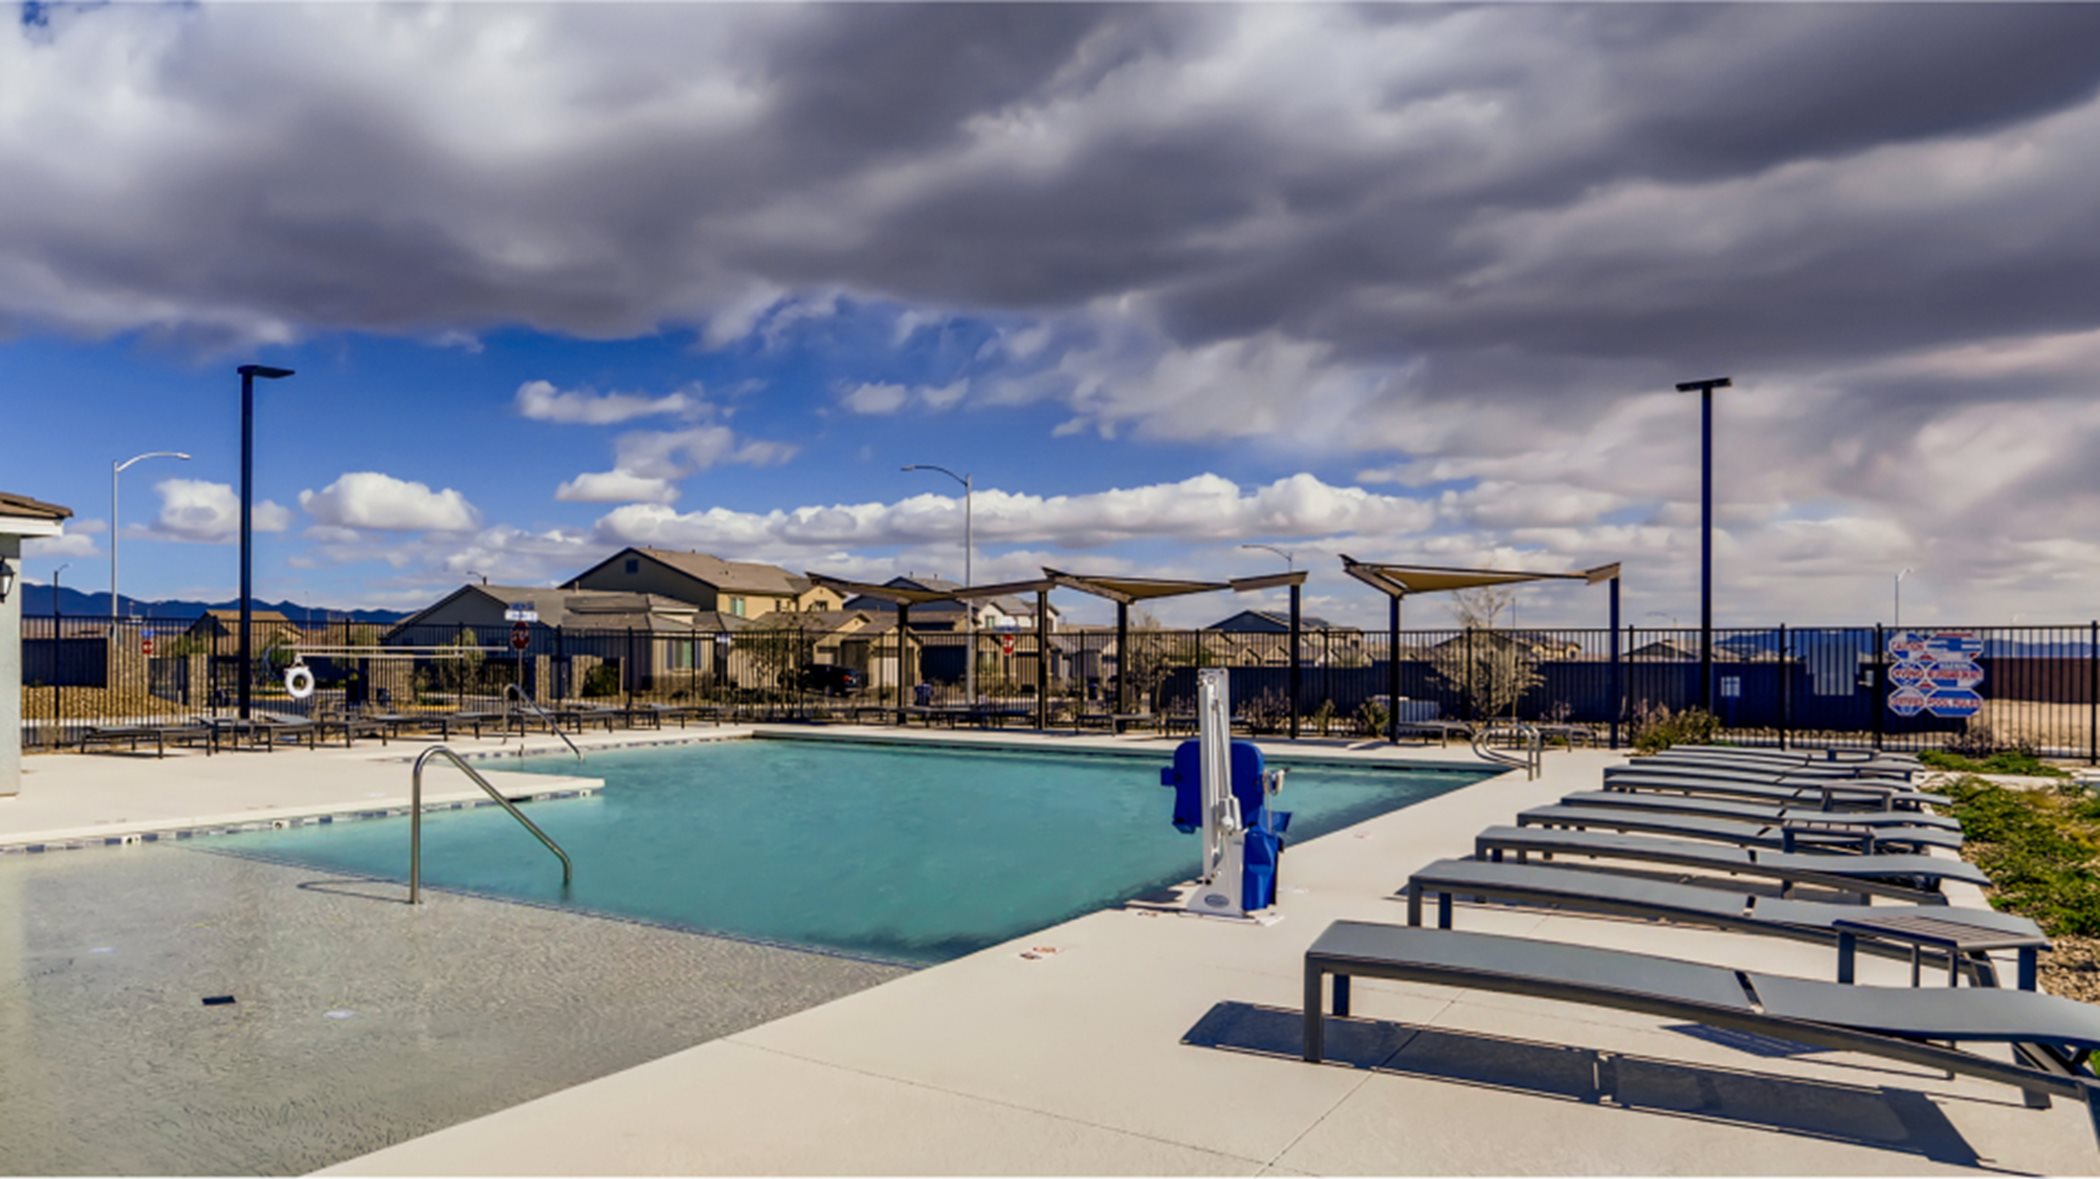 Stone Creek swimming pool features lounge chairs